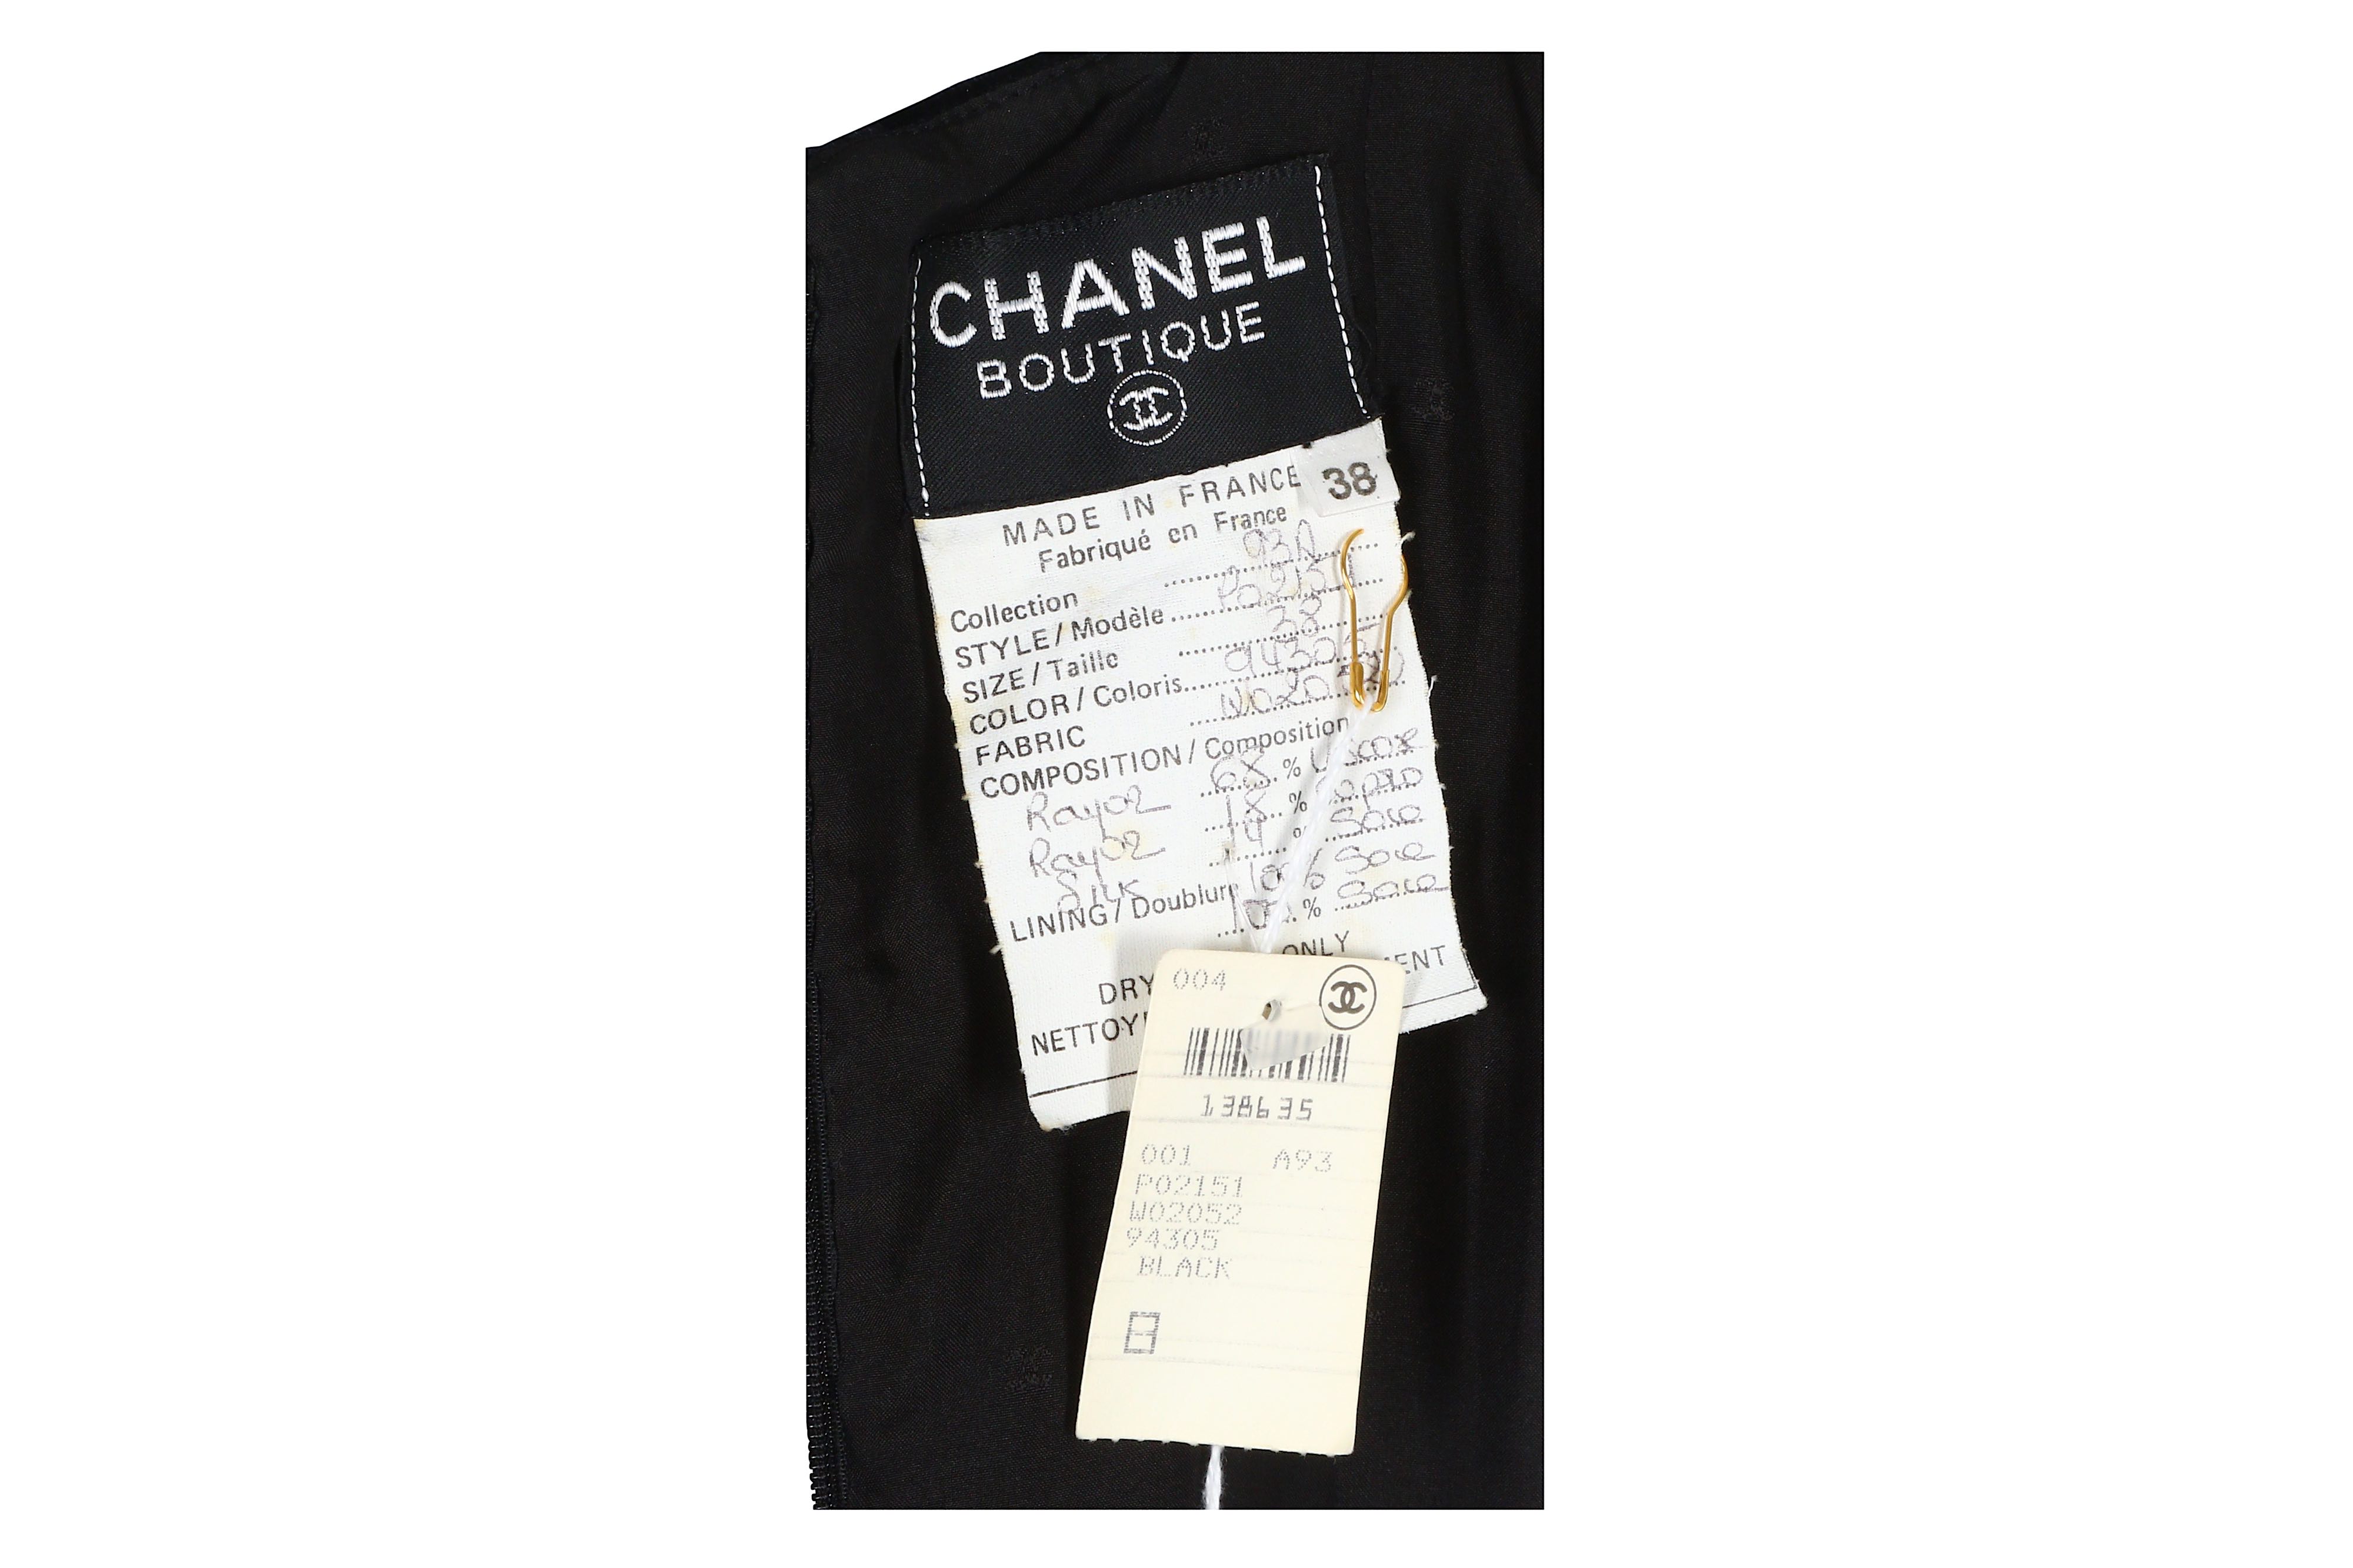 Chanel Black Velvet and Chiffon Fitted Dress - size 38 - Image 5 of 5